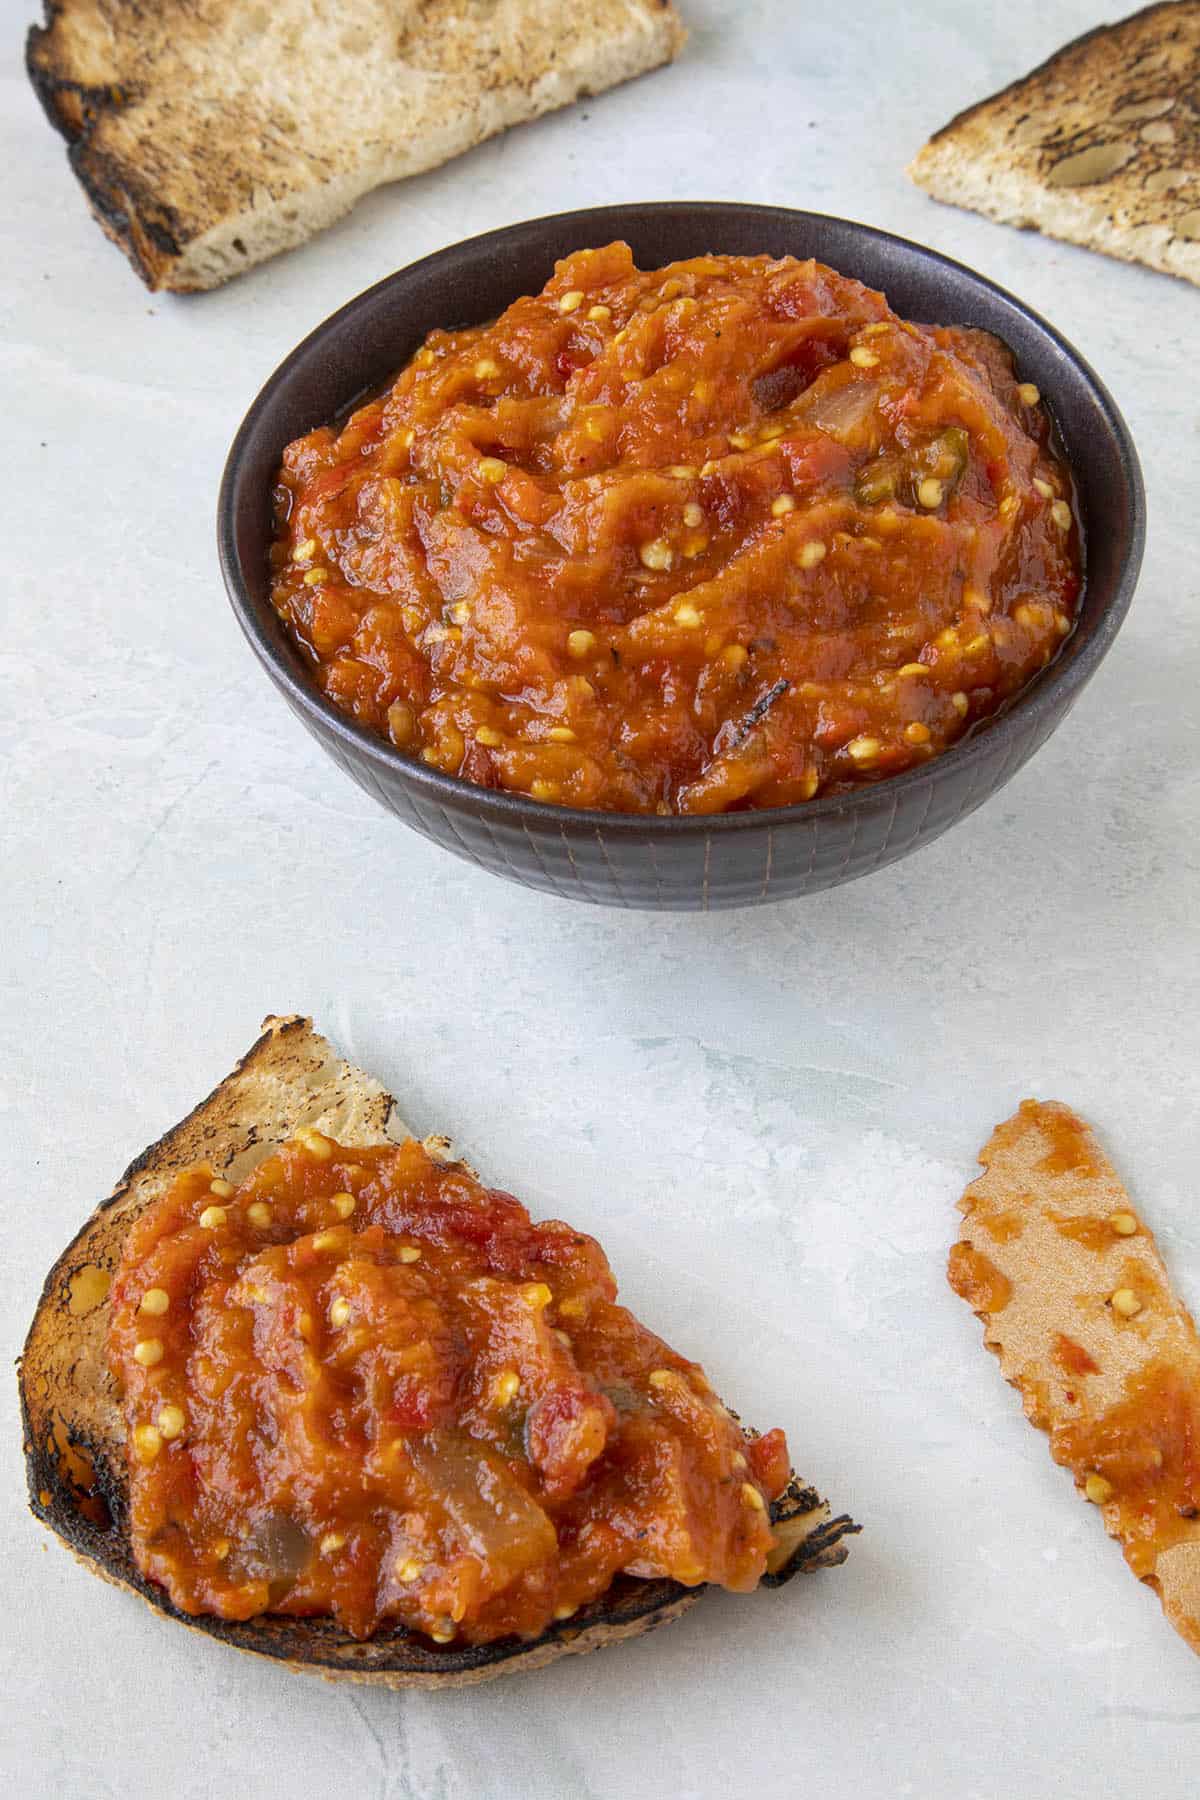 Zacusca Recipe (Romanian Roasted Egglplant and Red Pepper Spread)